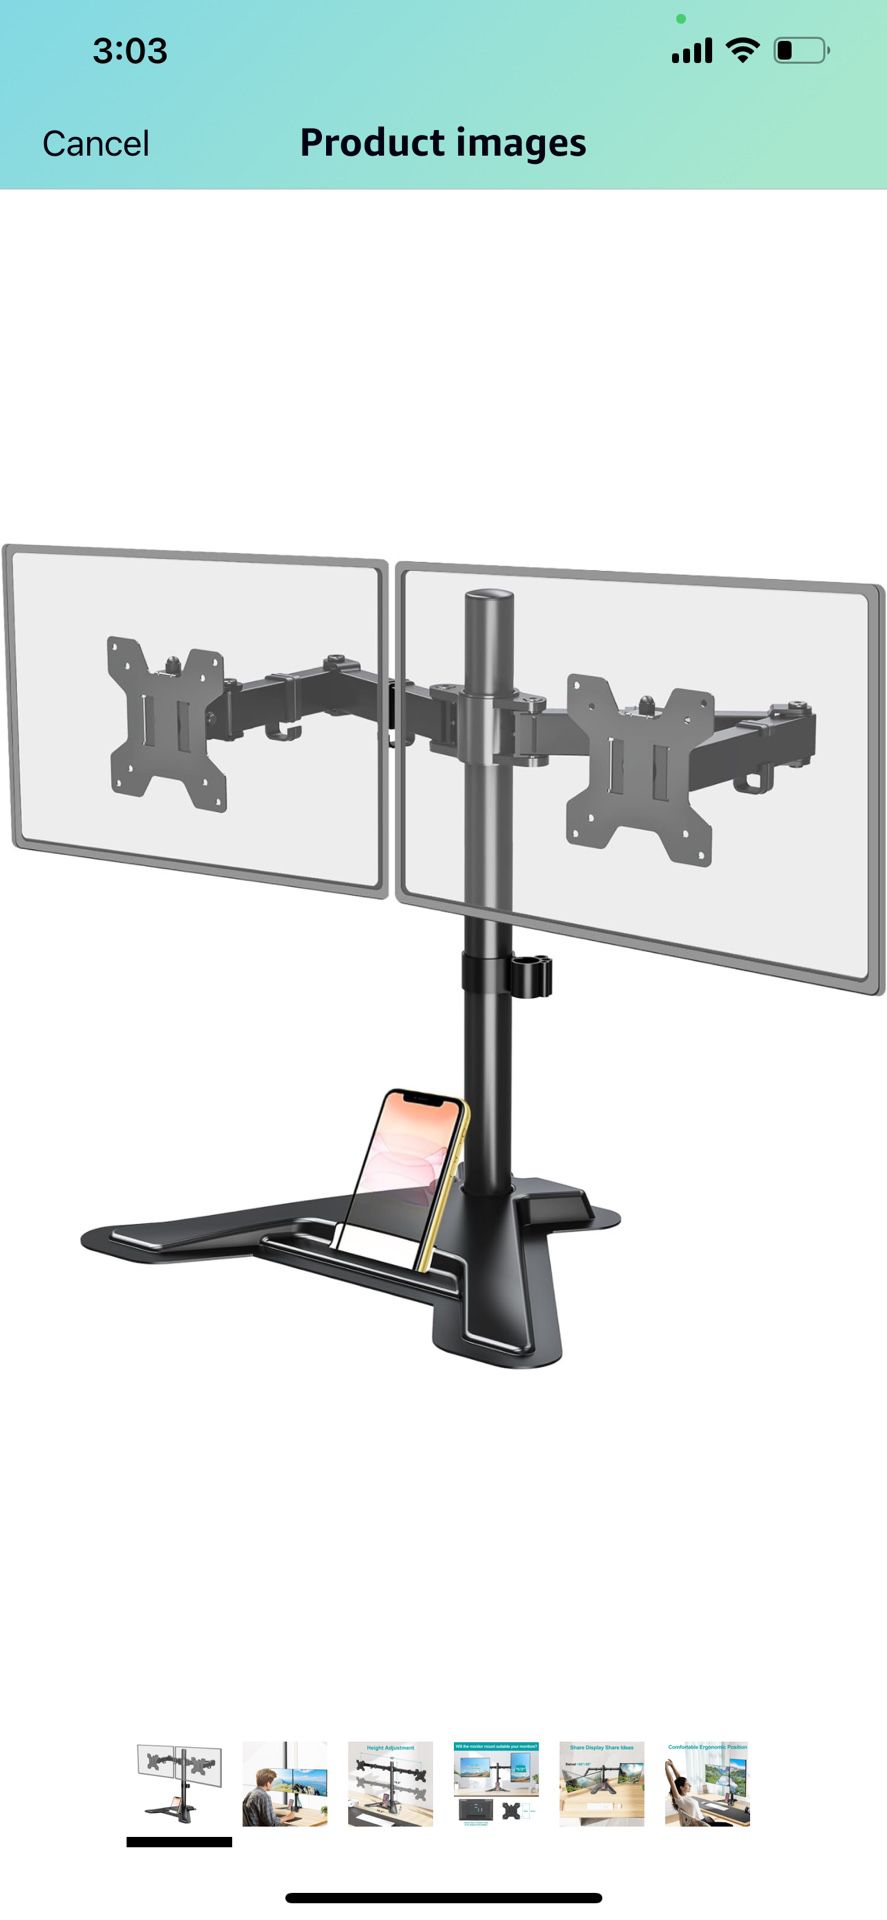  Dual Monitor Stand - Free Standing Full Motion Monitor Desk Mount Fits 2 Screens up to 27 inches,17.6lbs with Height Adjustable, Swivel, Tilt, Rotati